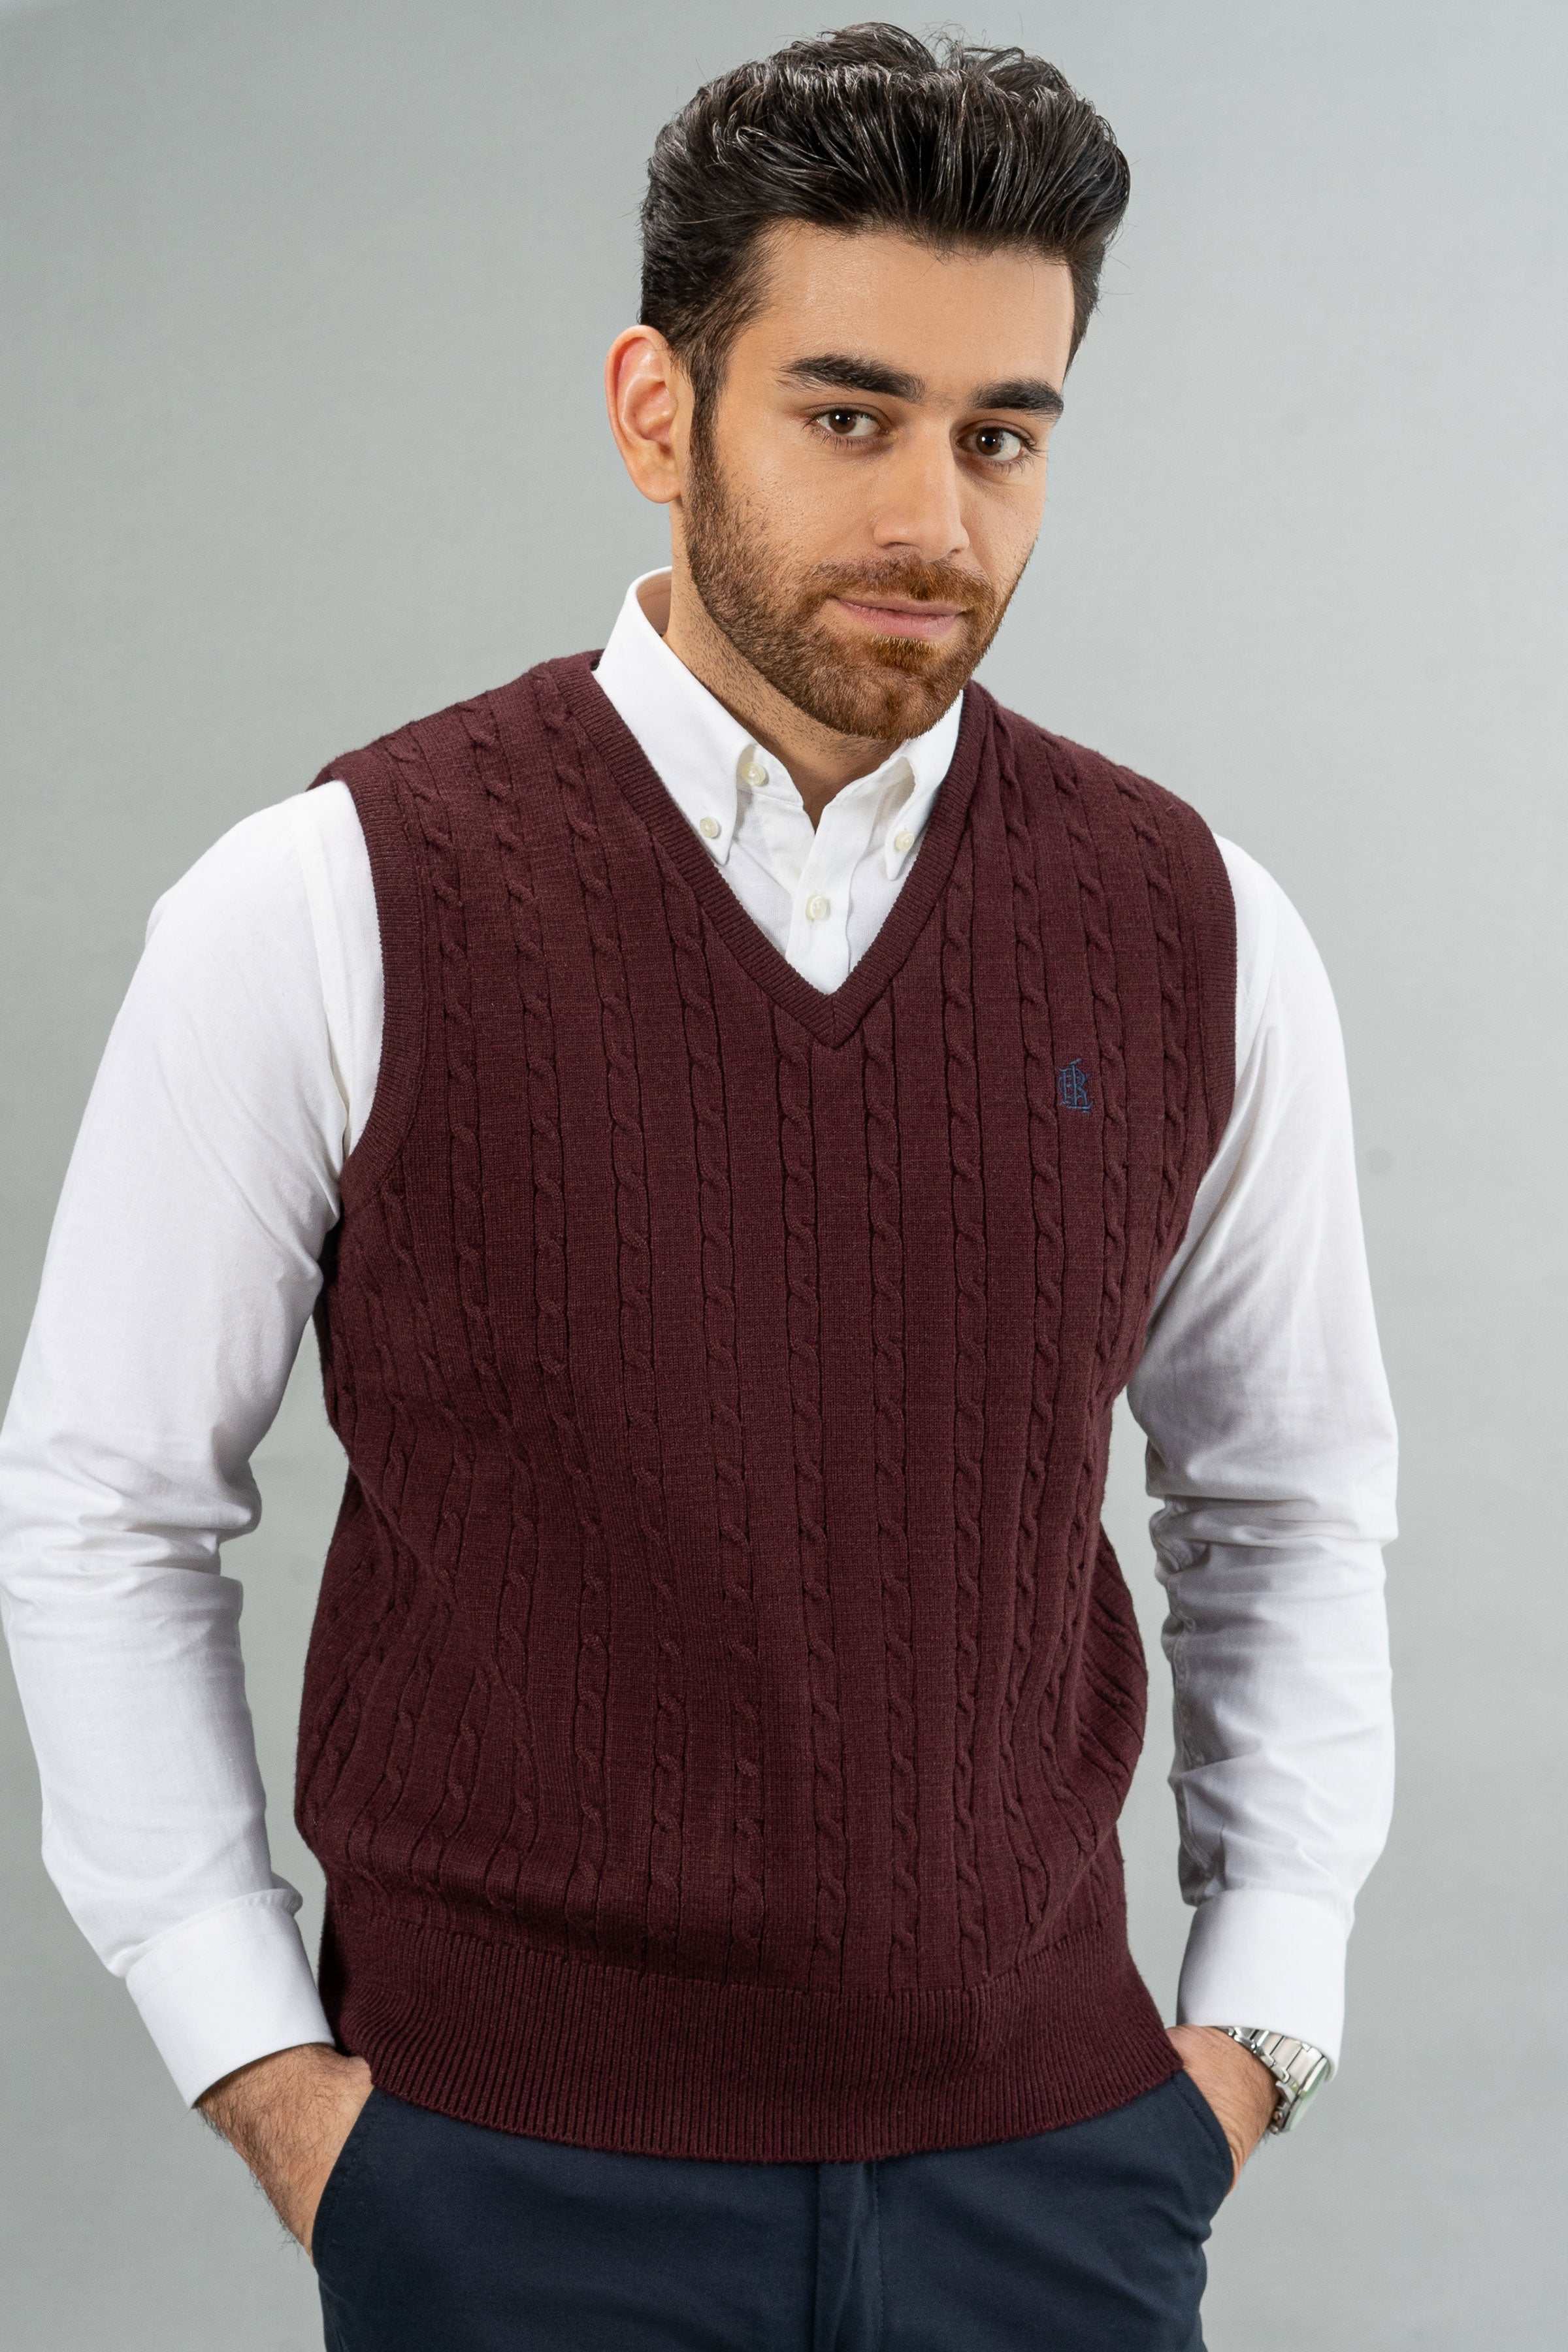 SLEEVELESS SWEATER MAROON at Charcoal Clothing